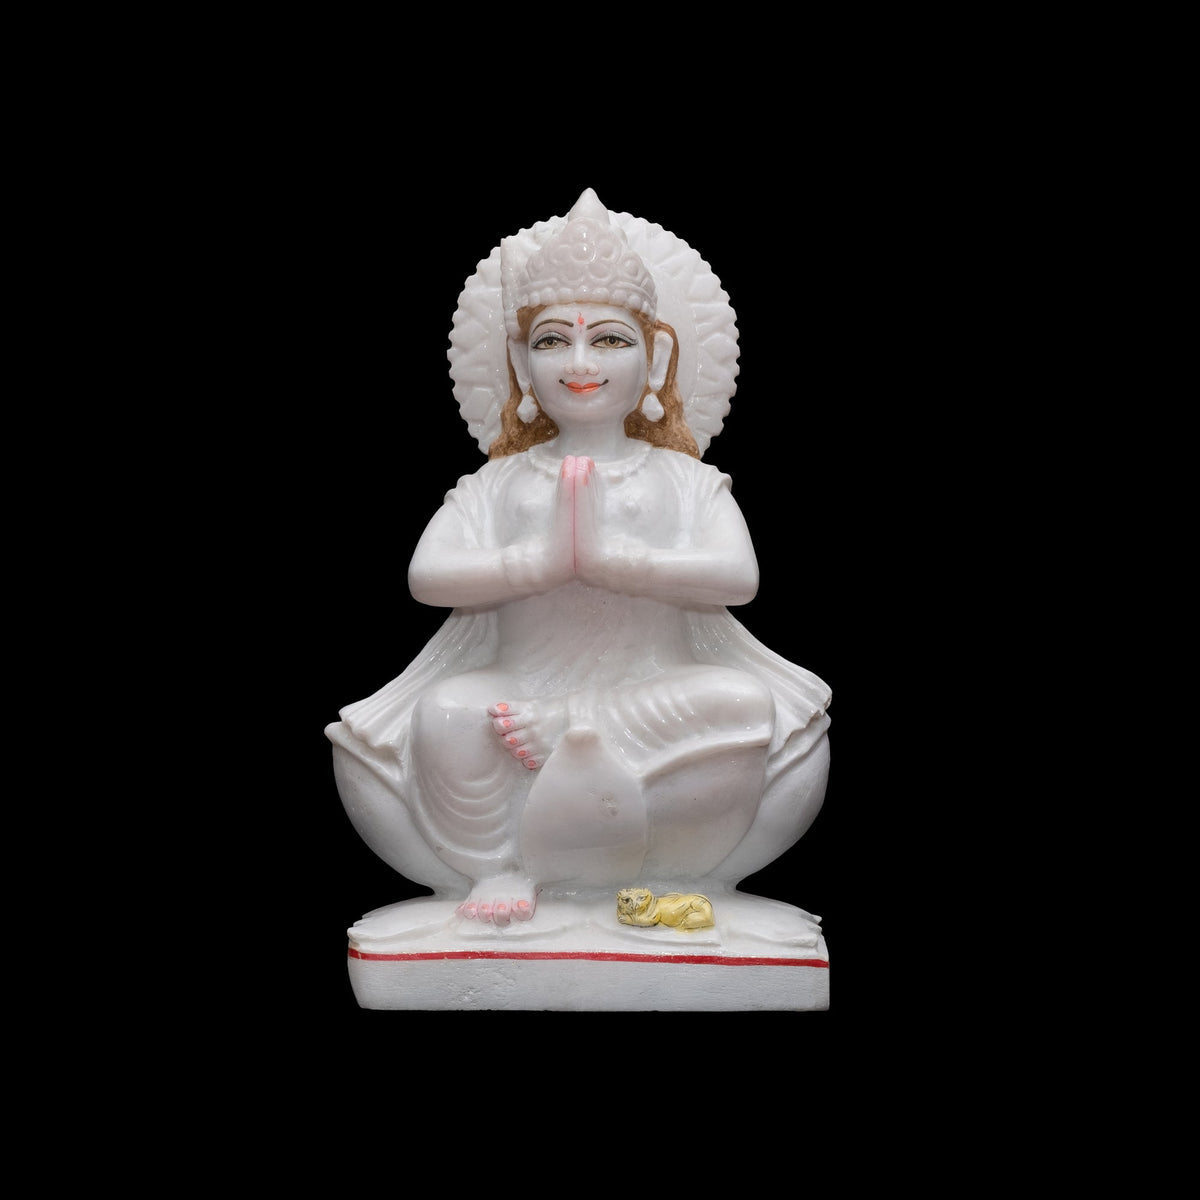 Marble Goddess Parvati on White Lotus Aasan in Namaste Position Statue - 12 x 7 x 4 inches